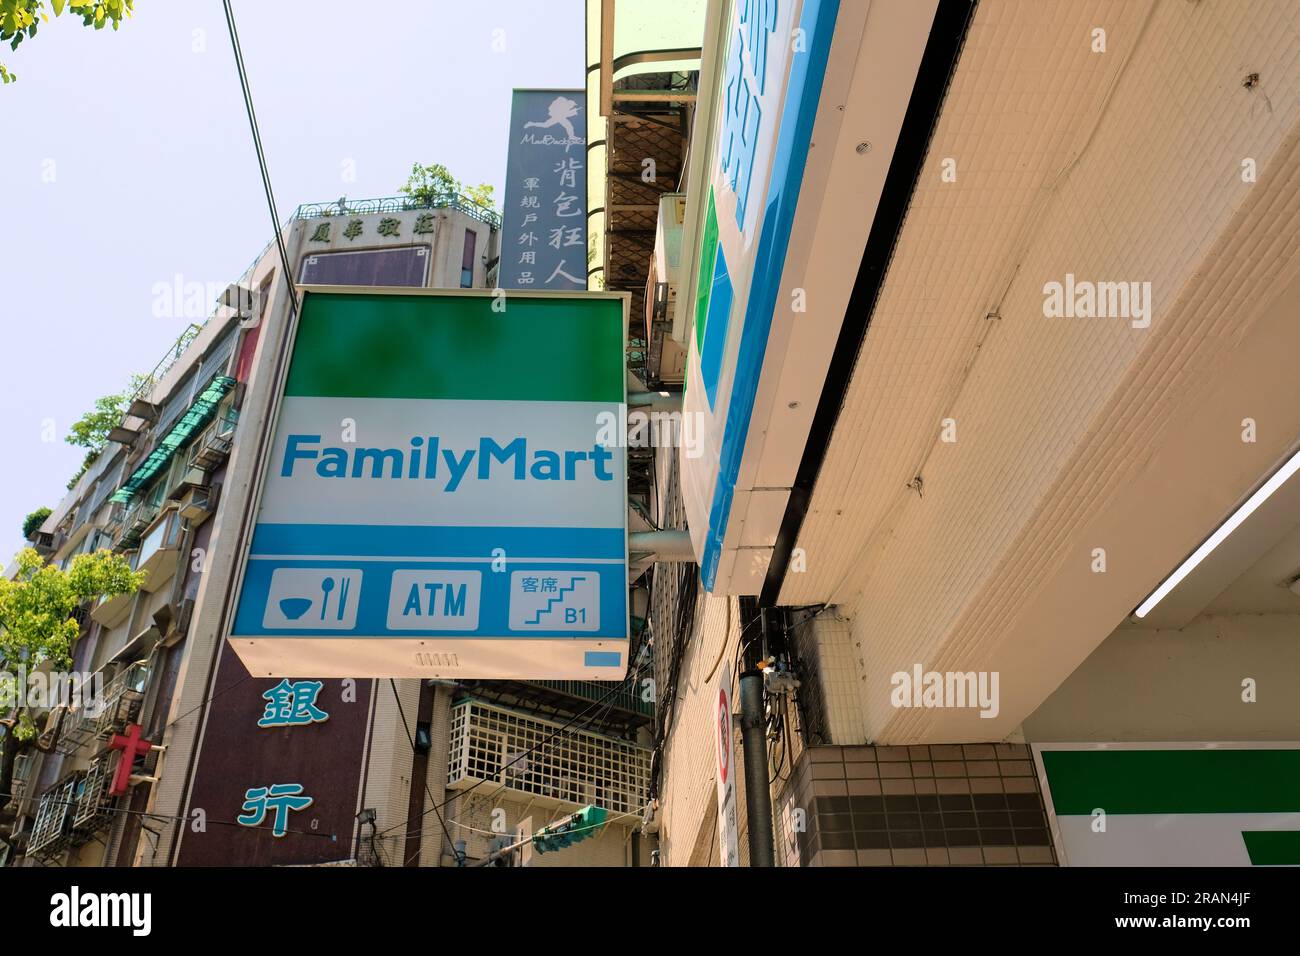 FamilyMart store branch and location in Taipei, Taiwan; a Japanese convenience store franchise chain with locations throughout Asia. Stock Photo